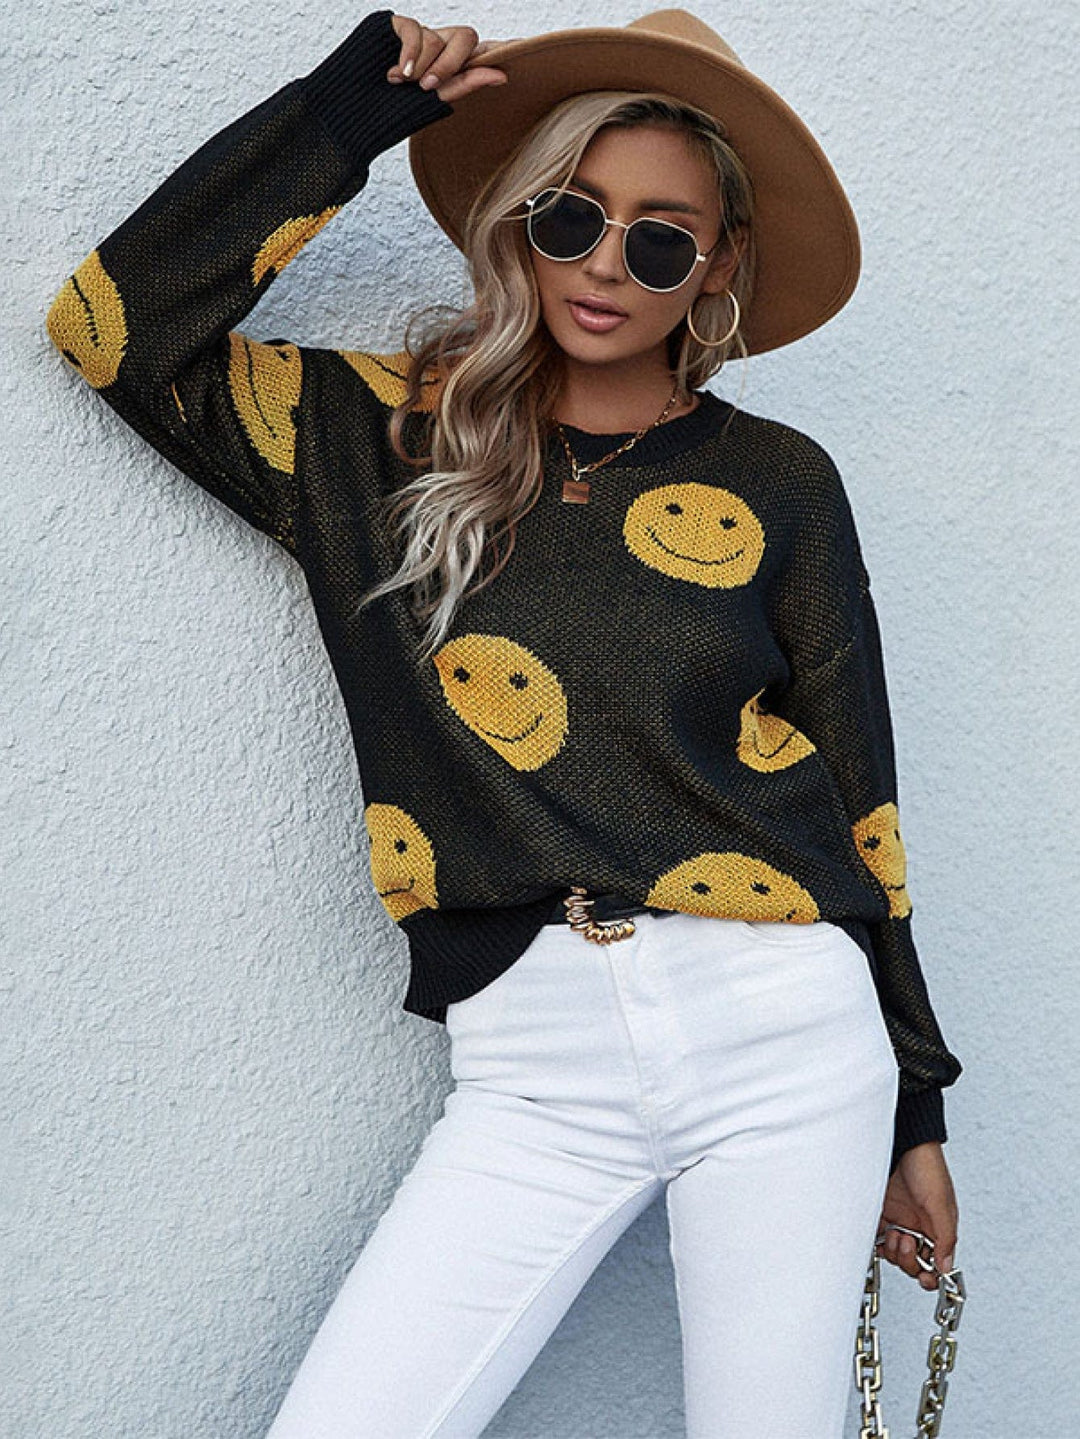 Smiley Face Sweater - Runway Frenzy 